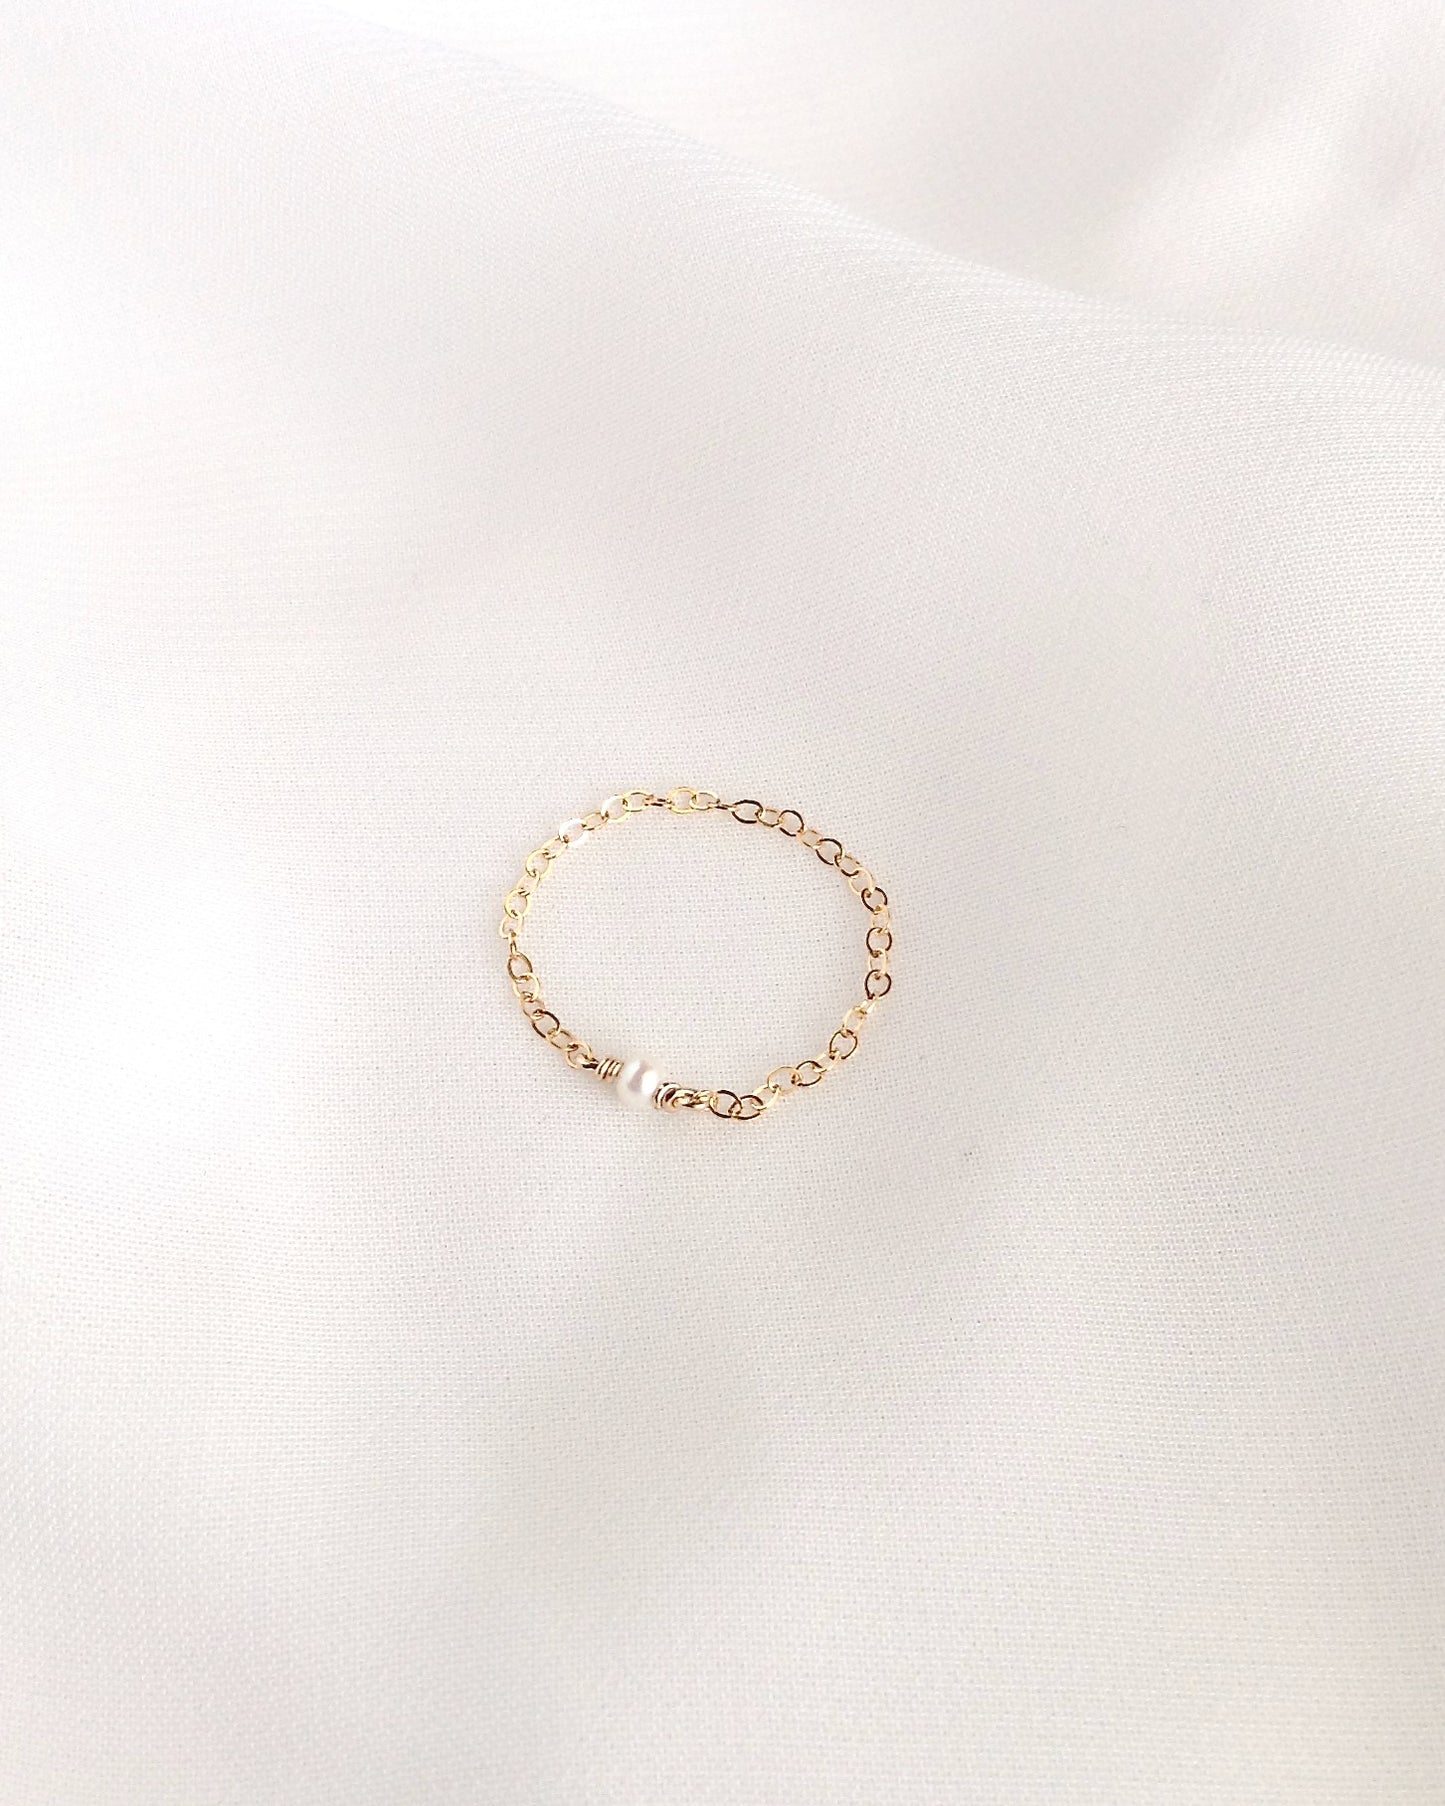 Minimalist Pearl Ring | Thin Chain Ring in Gold Filled or Sterling Silver | IB Jewelry